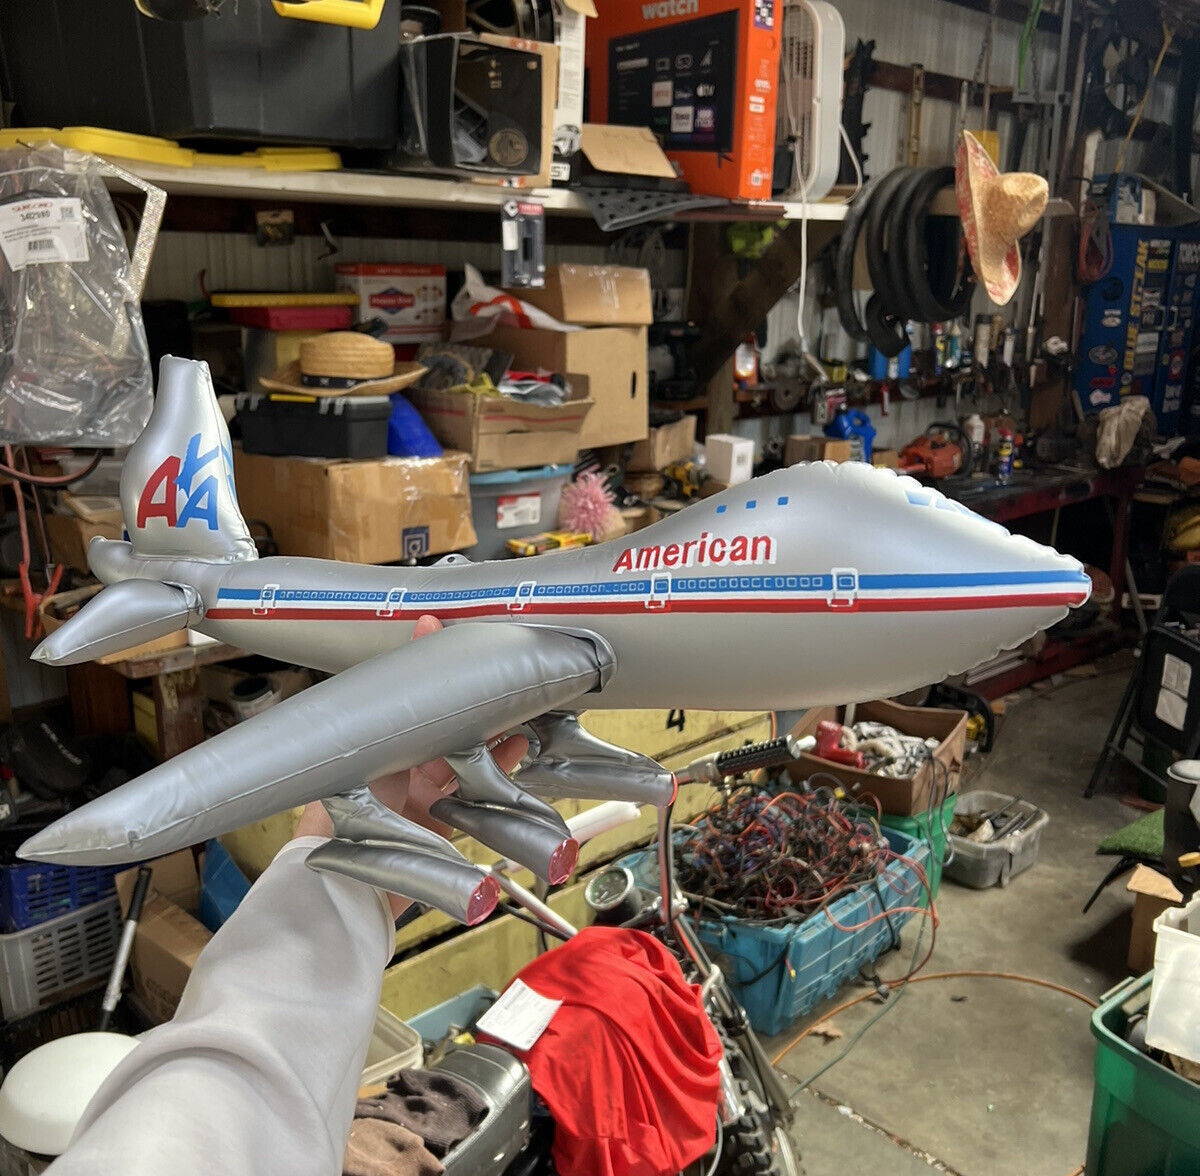 Mini American Airlines Jet Air Inflatable Plane 747 Boeing Toy Rare VTG 1970 777